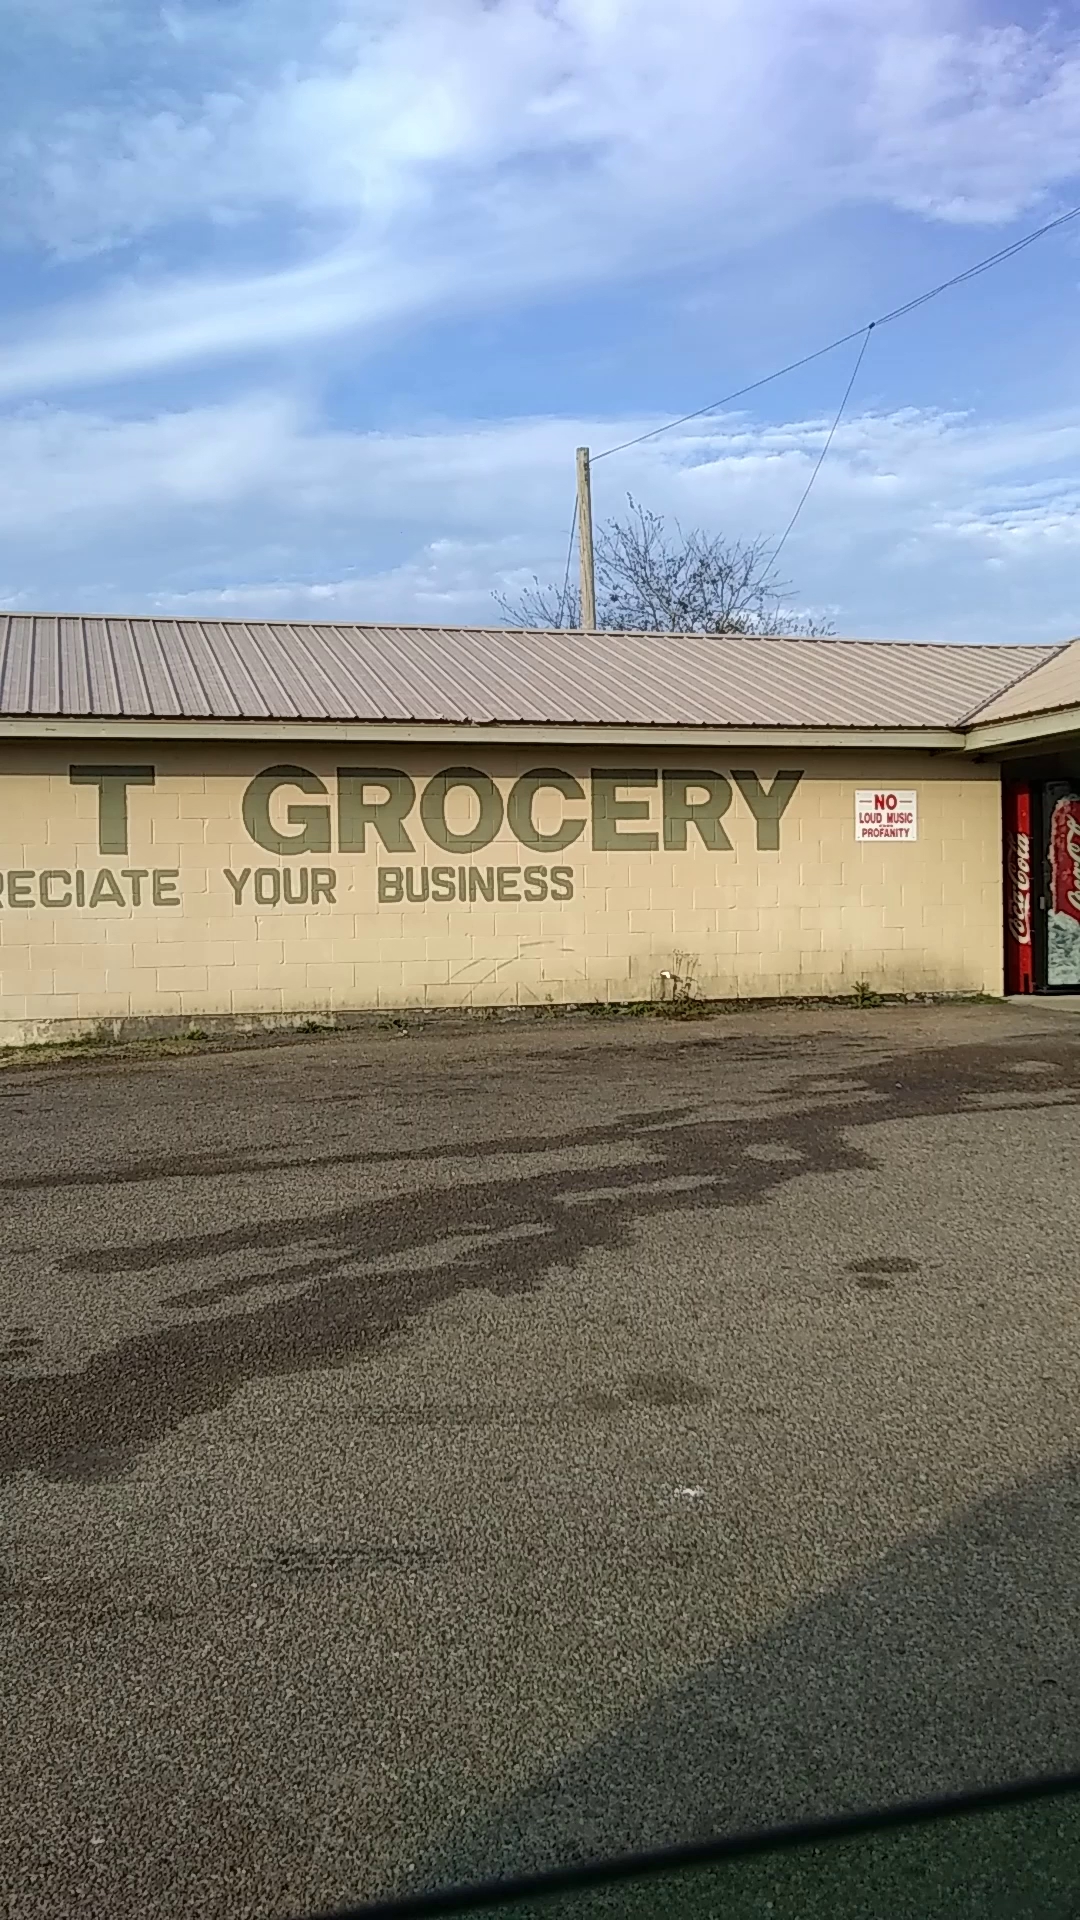 Double T Grocery